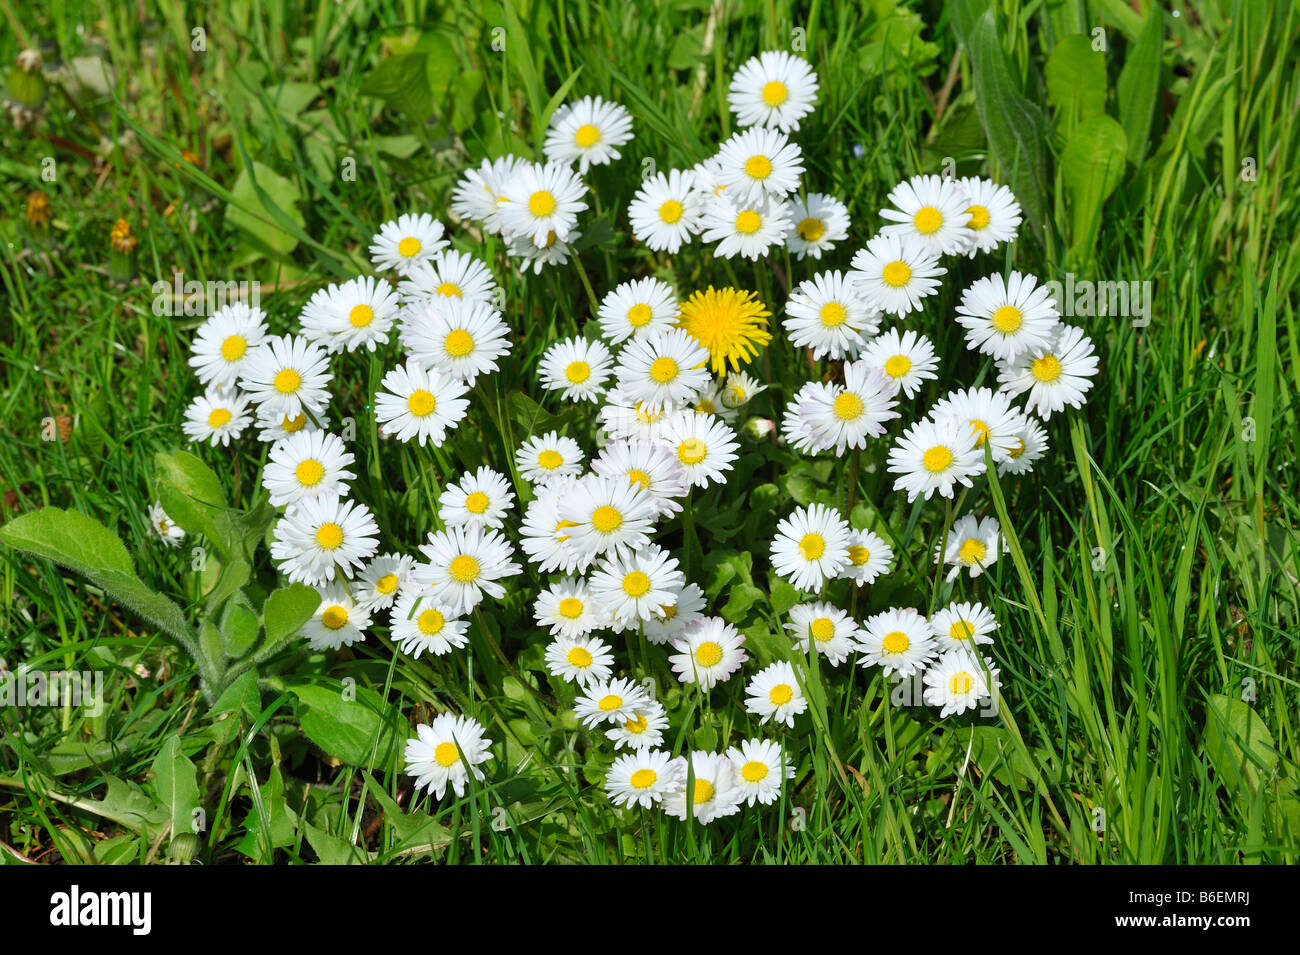 Common or Lawn Daisy (Bellis perennis) Stock Photo